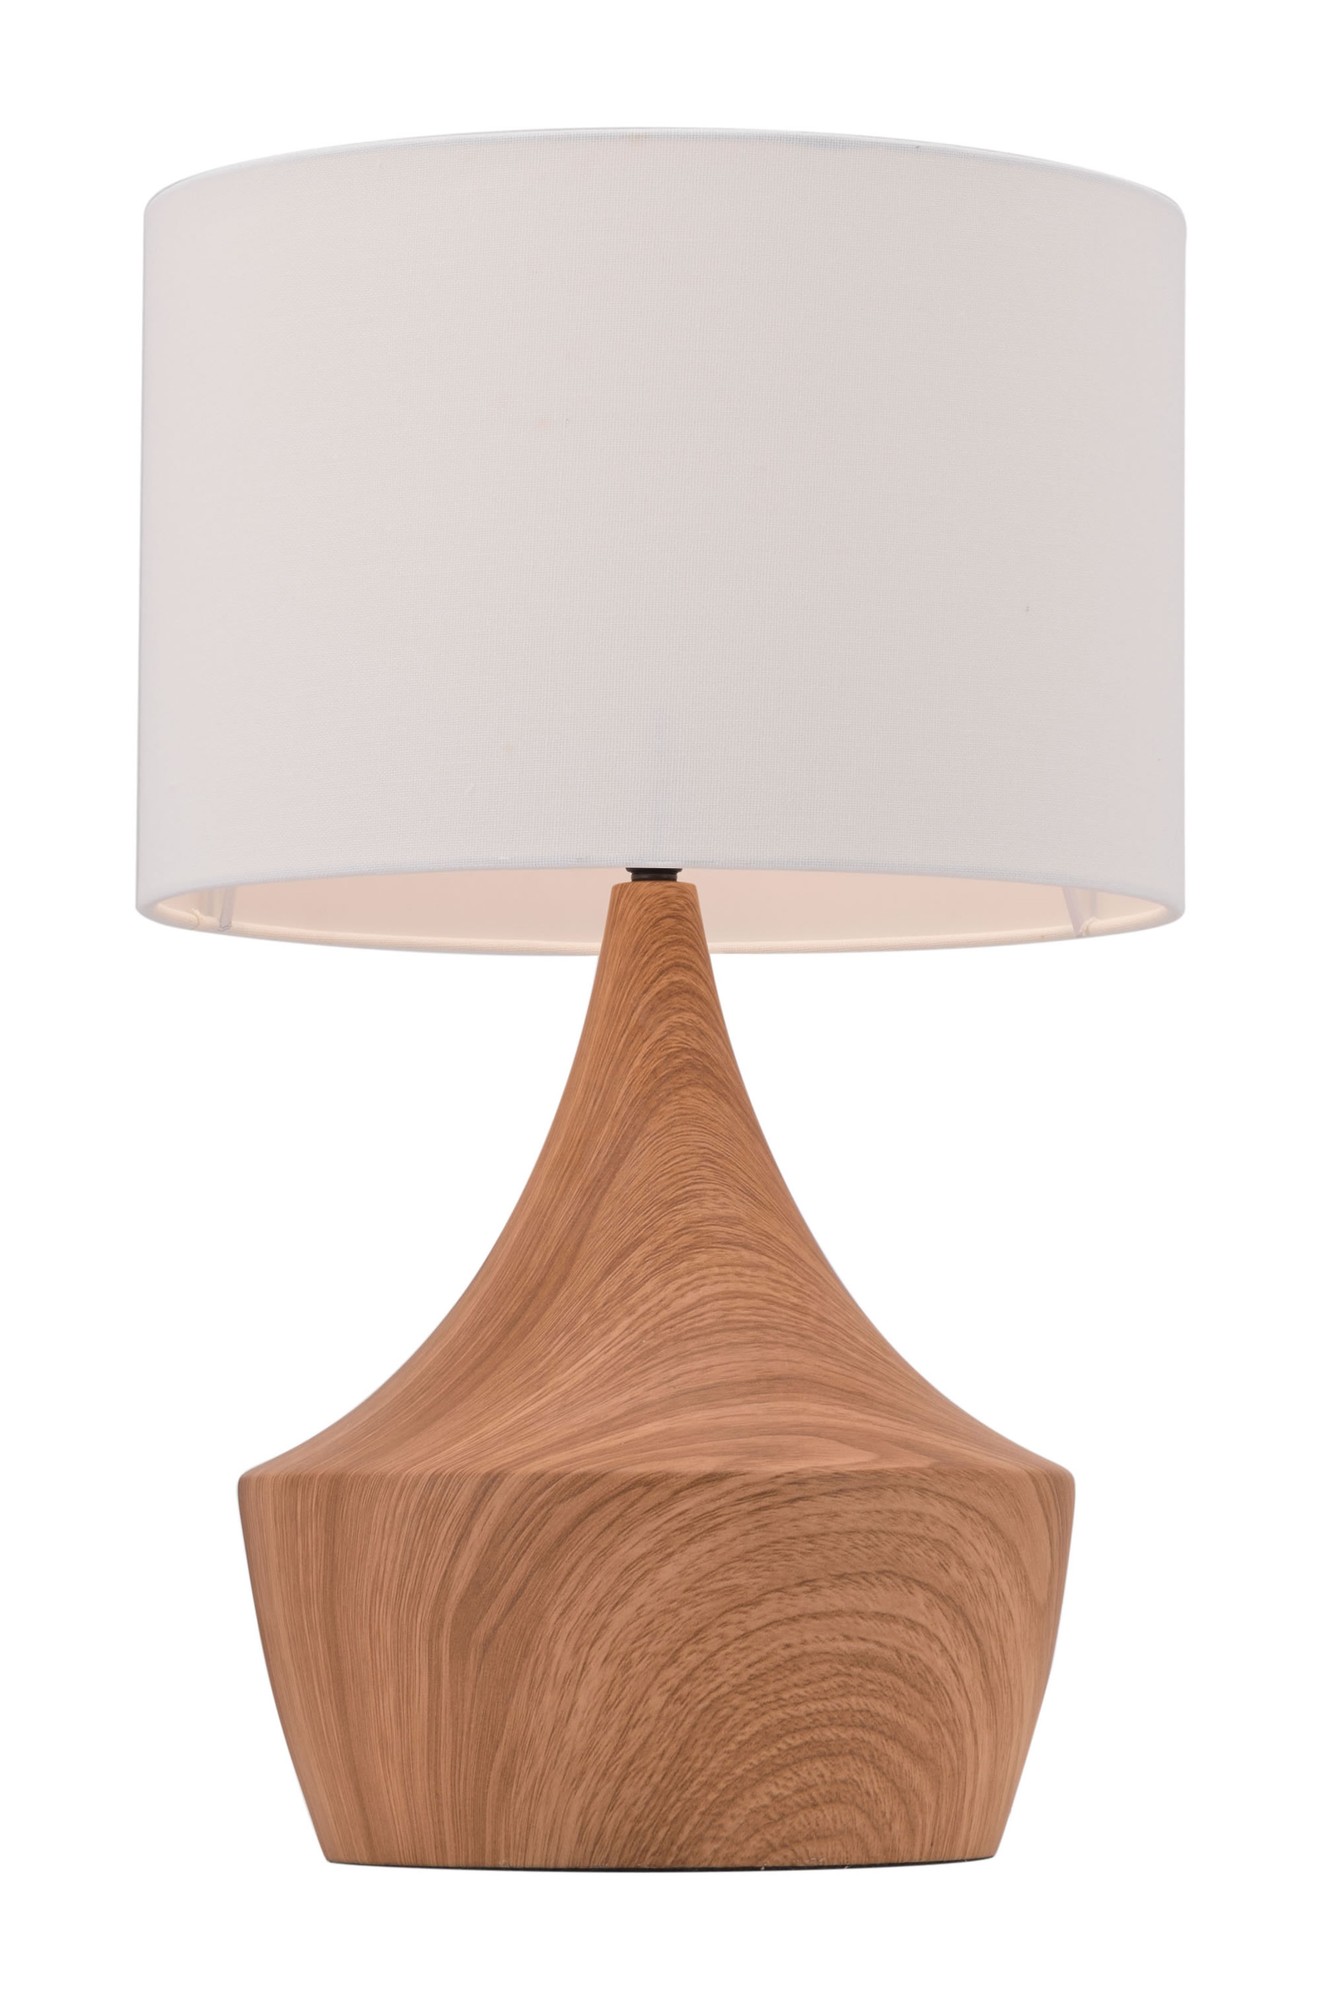 11.8" x 11.8" x 18.7" White & Brown, Polyblend, Steel, Table Lamp